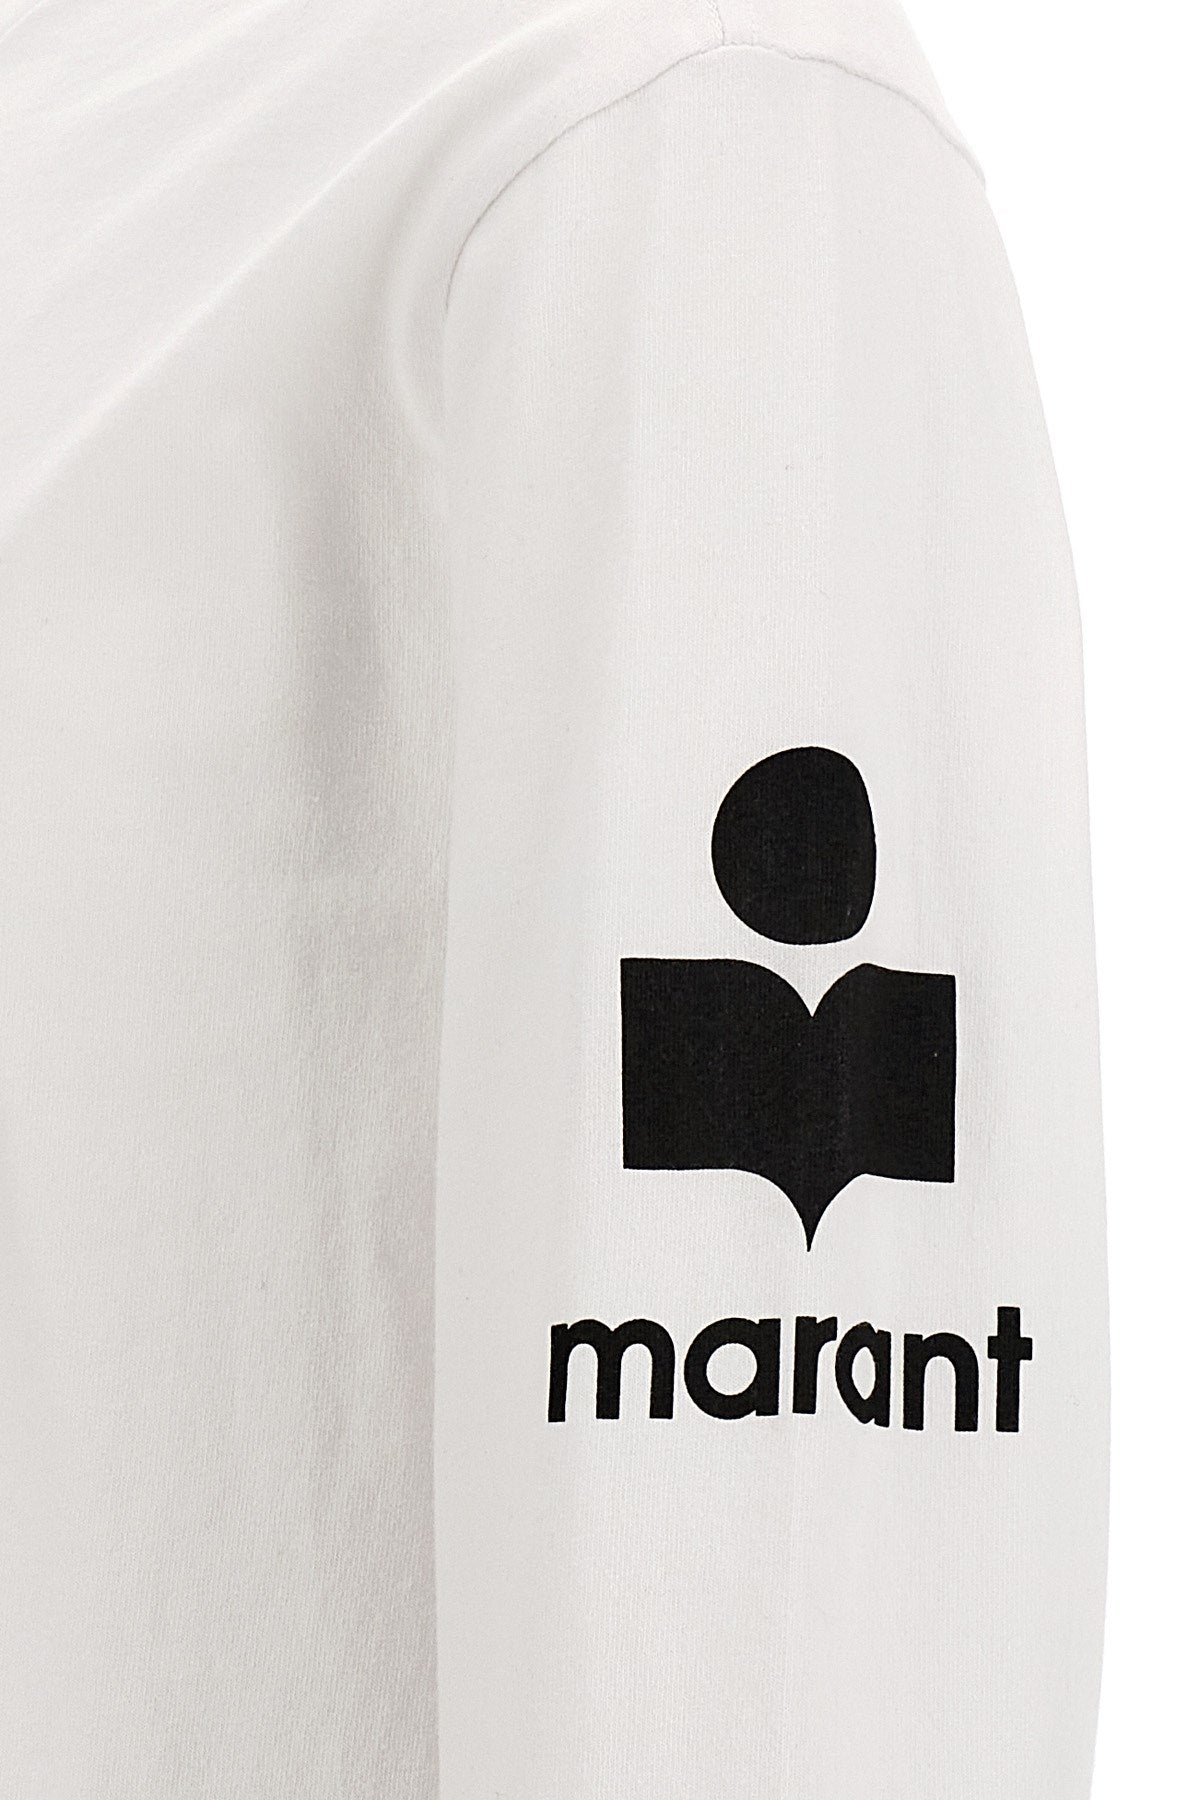 The Isabel Marant Gianni Tee Shirt in White available at The New Trend Australia